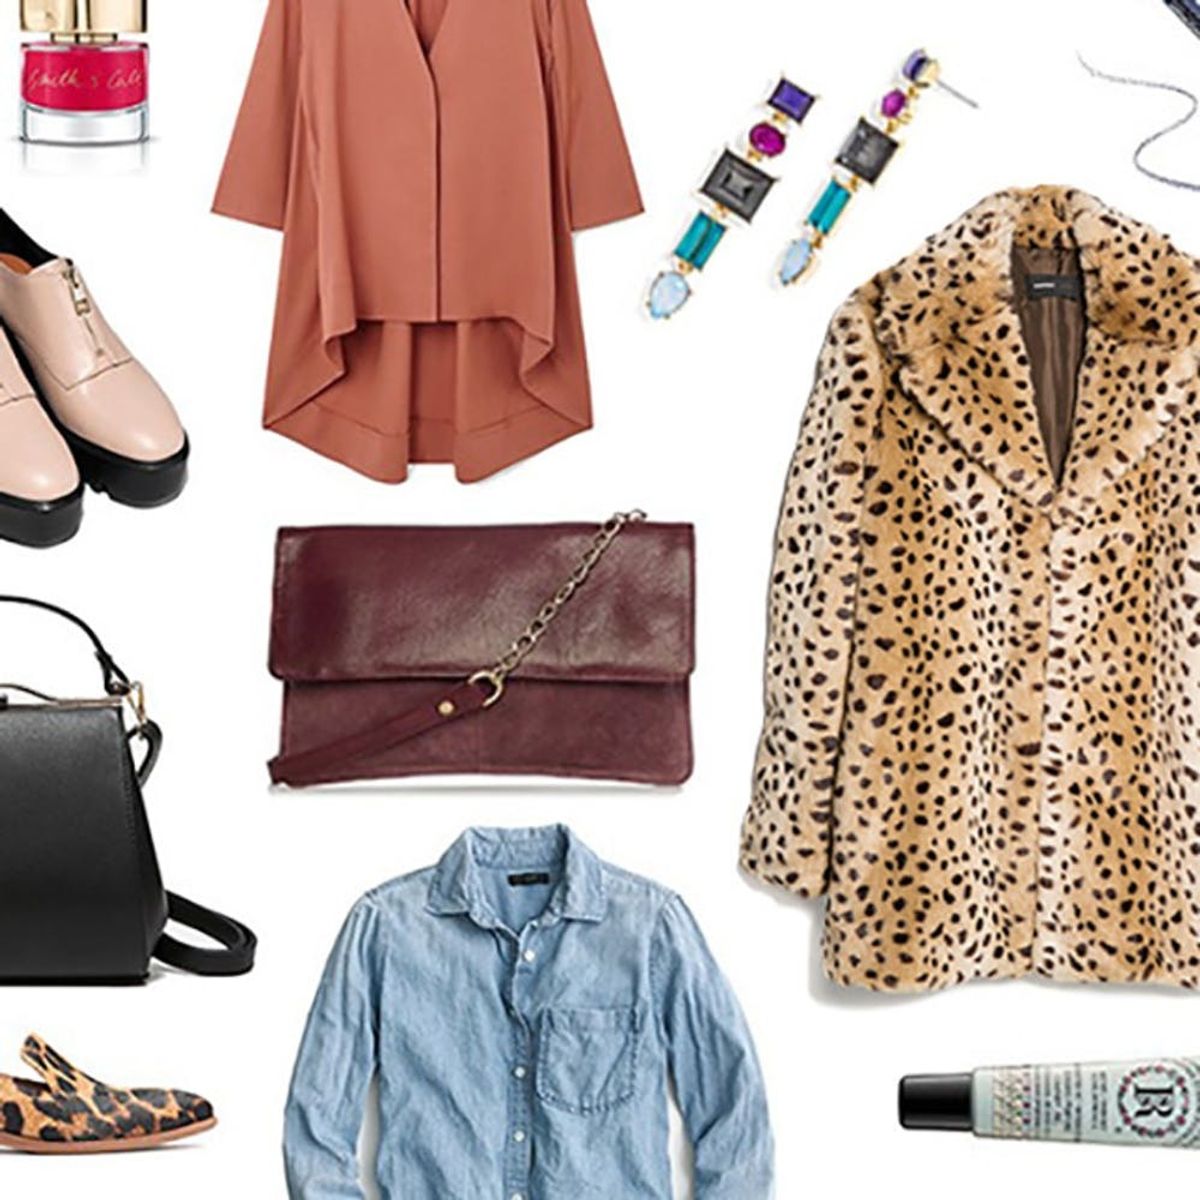 3 Outfits That Prove Leopard Print Is Definitely a Neutral